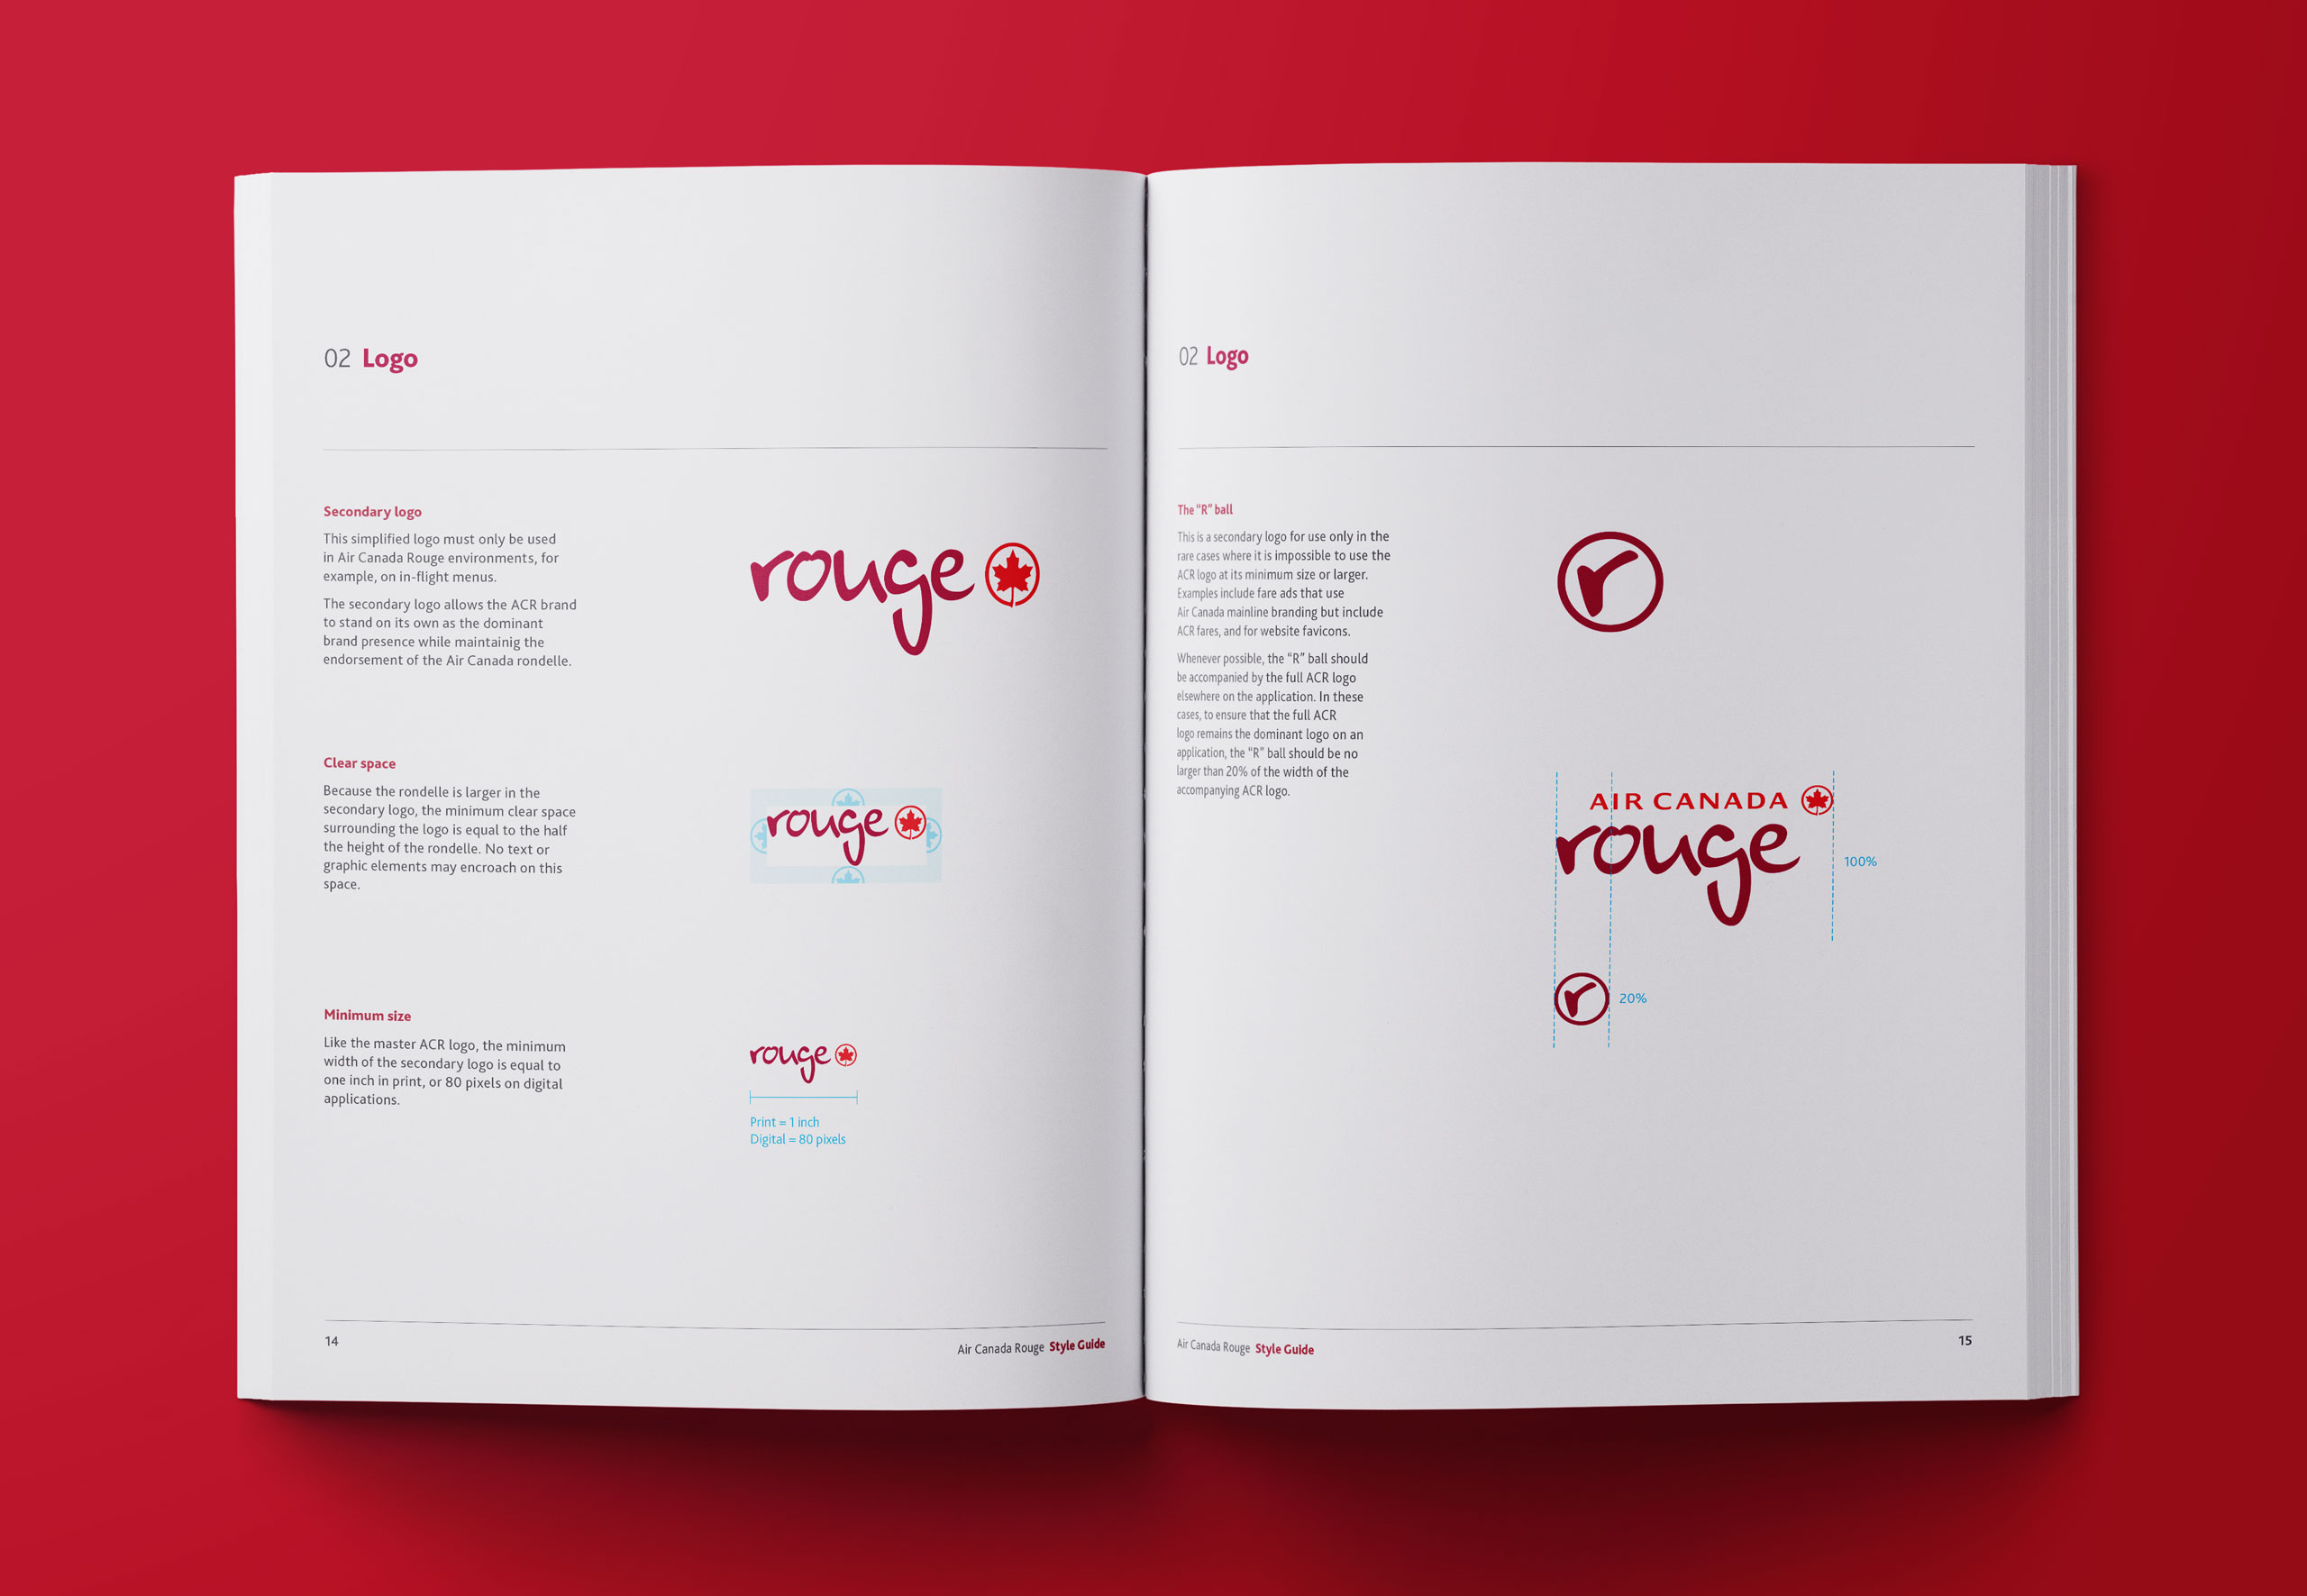 Book spread showing rules for sizing and clear space around the Air Canada Rouge logo